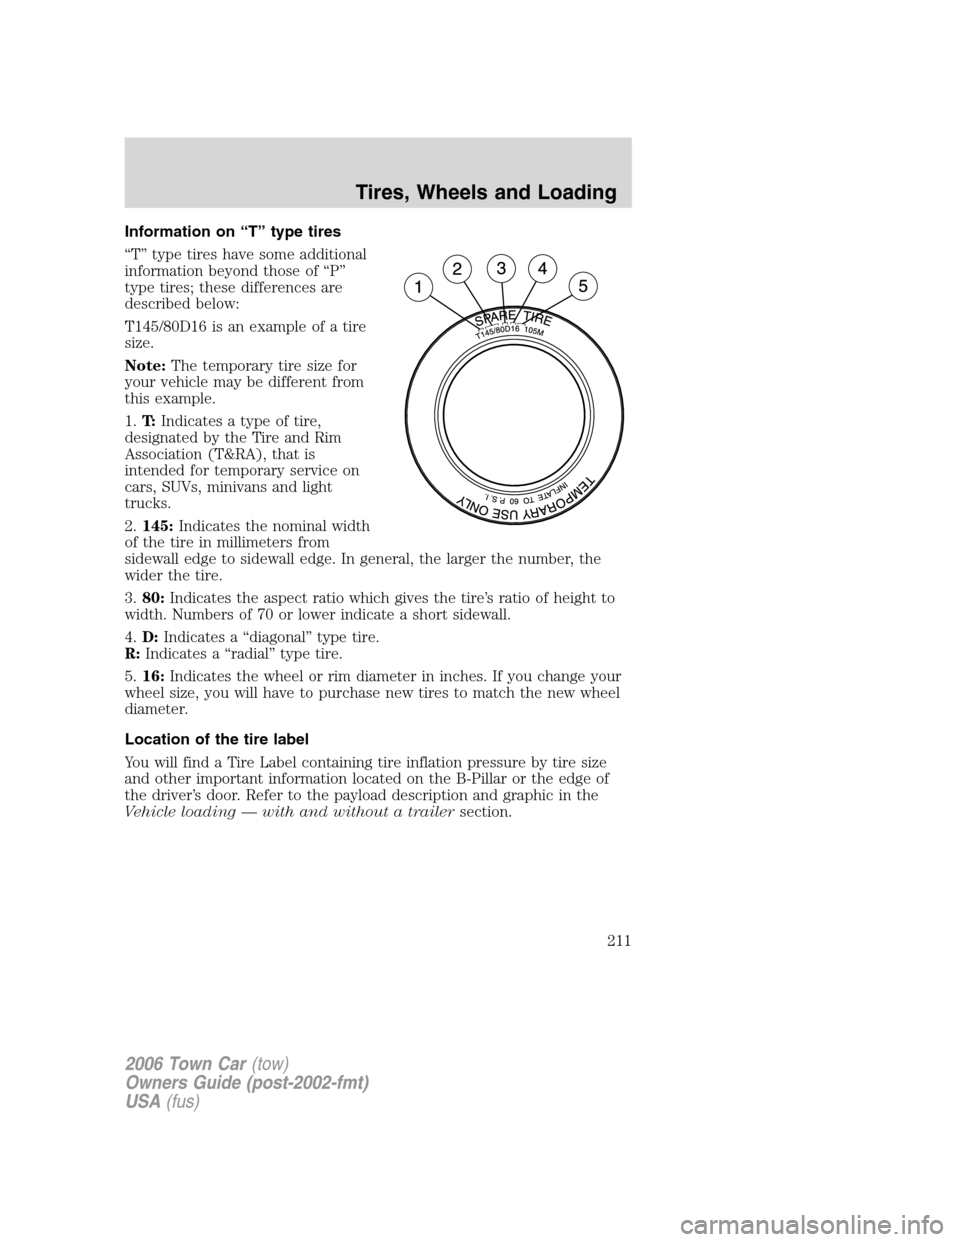 LINCOLN TOWN CAR 2006 User Guide Information on “T” type tires
“T” type tires have some additional
information beyond those of “P”
type tires; these differences are
described below:
T145/80D16 is an example of a tire
size